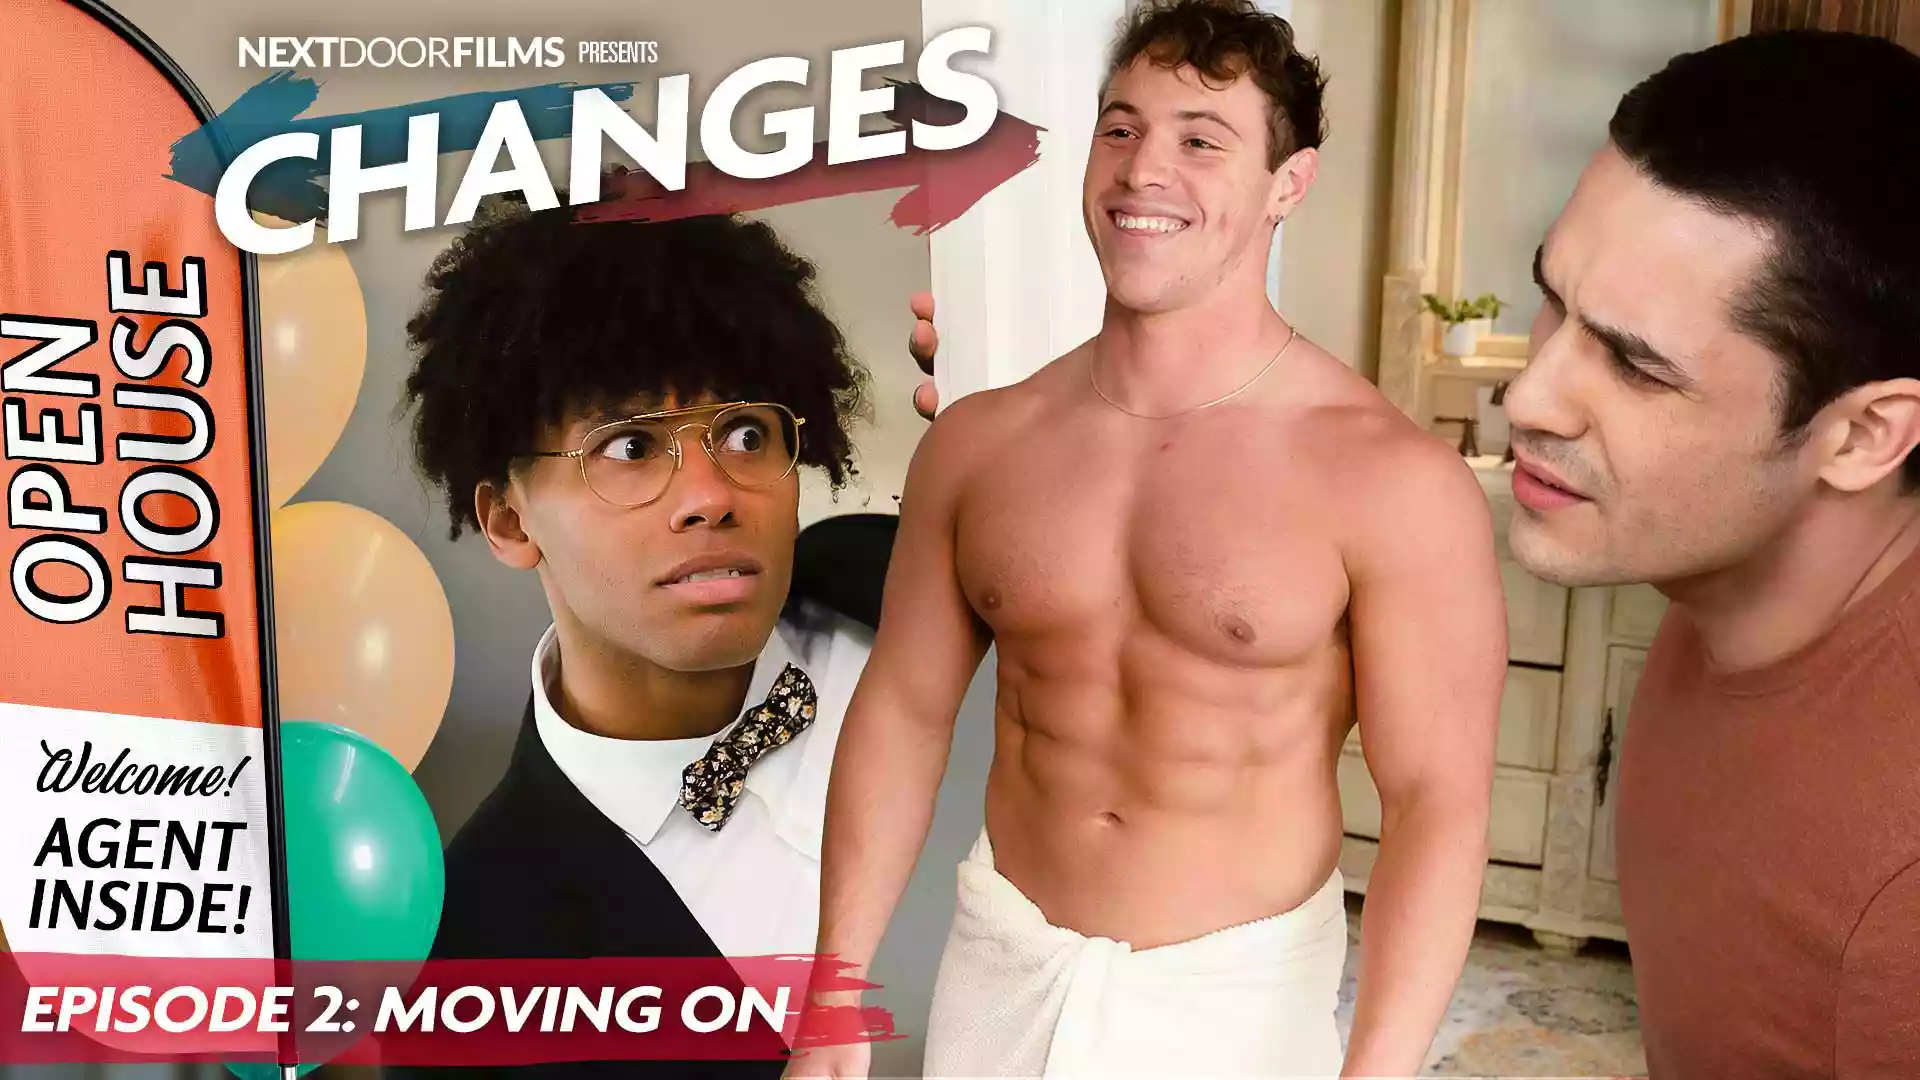 Changes Episode 2, Moving On – Andrew Miller, Kyle Fletcher and Tony Genius